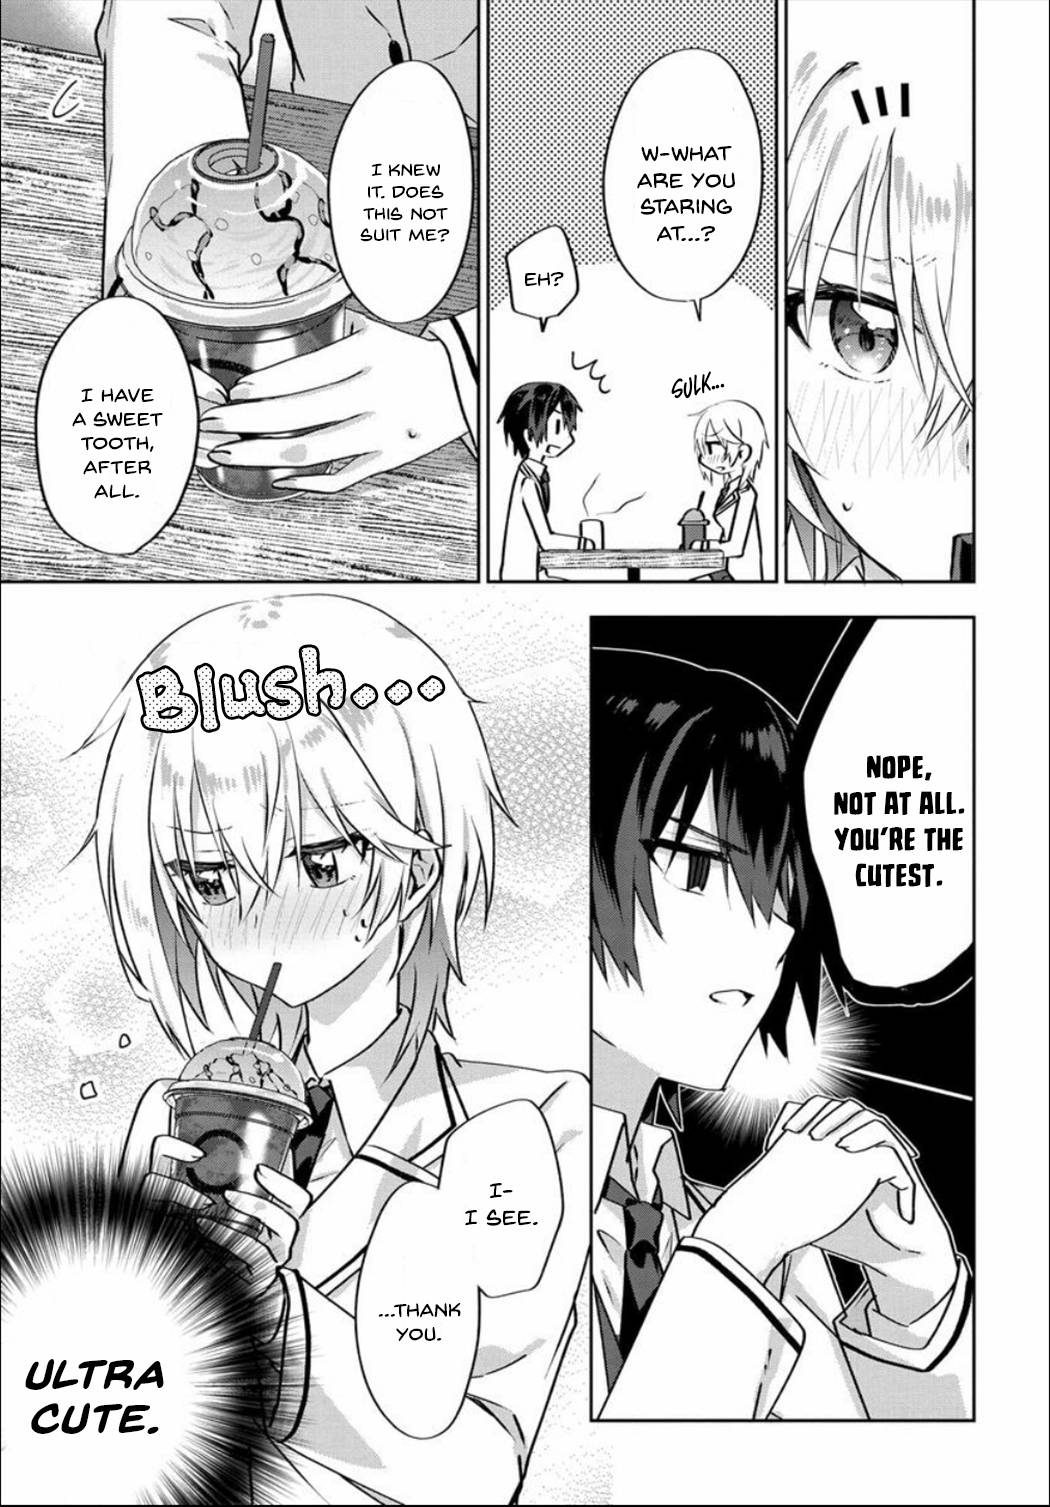 Since I’Ve Entered The World Of Romantic Comedy Manga, I’Ll Do My Best To Make The Losing Heroine Happy - chapter 4.1 - #2